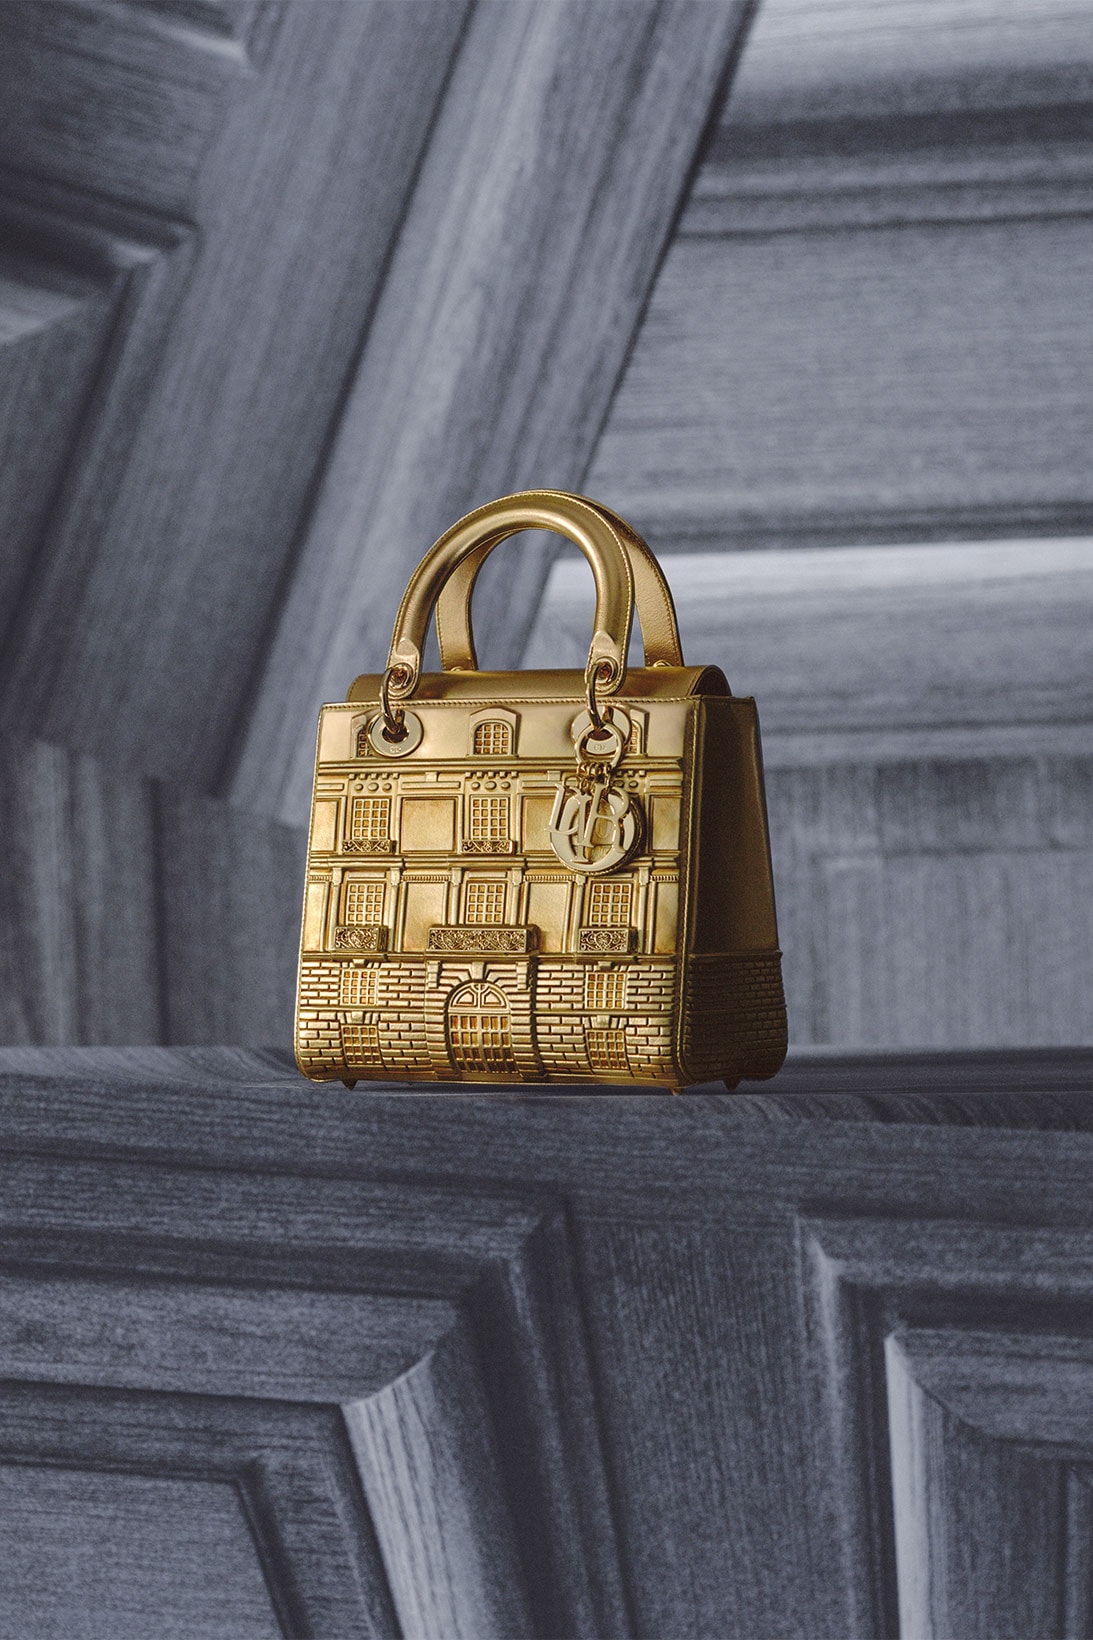 Dior 30 Montaigne Store Reopening Exclusive Handbags Accessories Release